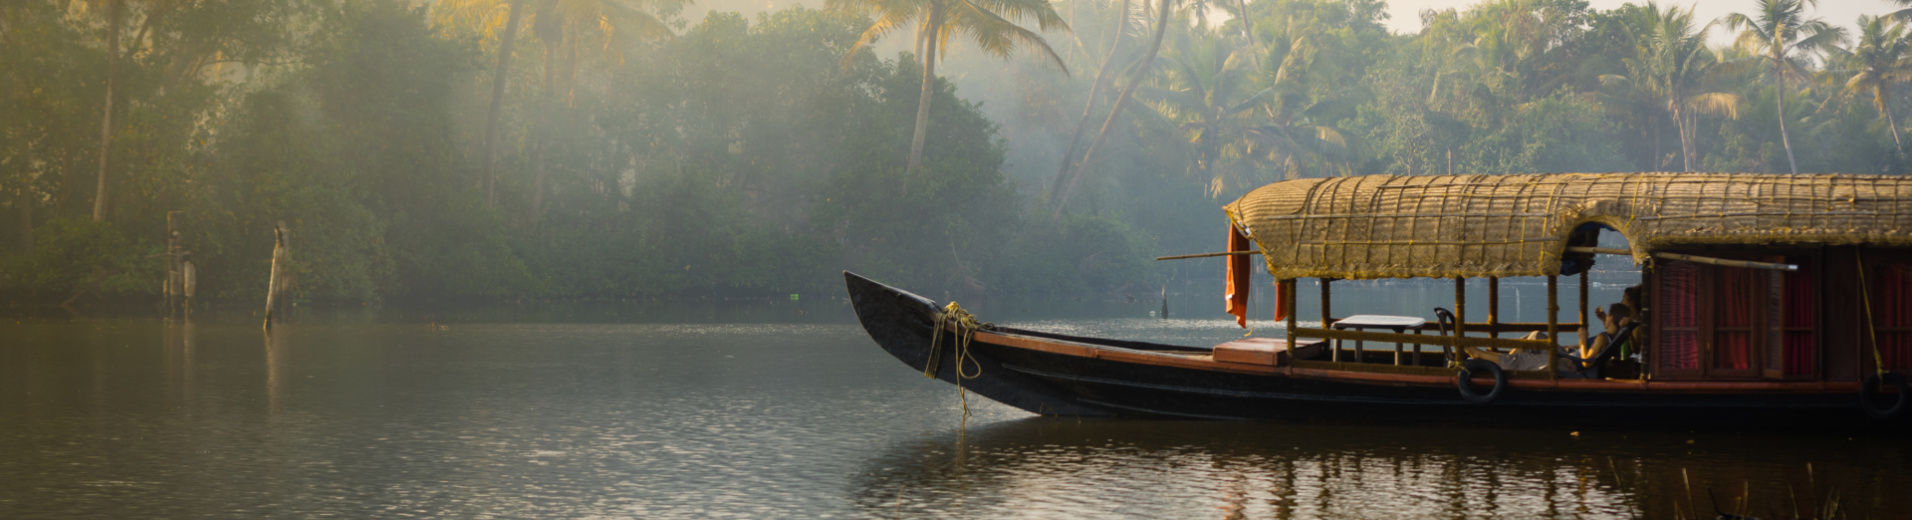 Bateau-traditionnel-backwaters-inde